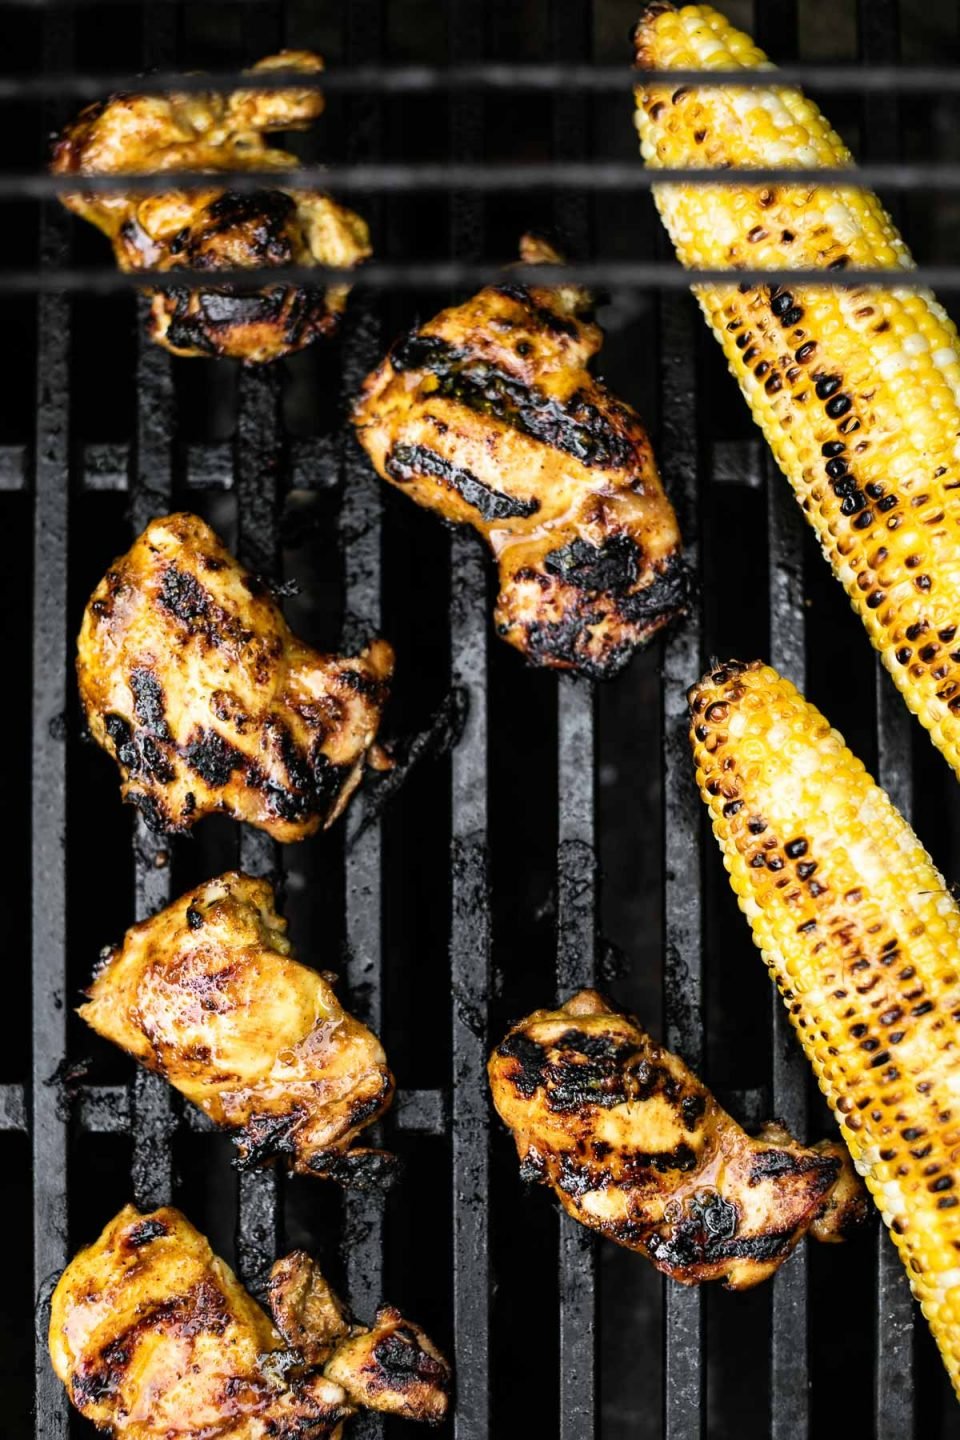 Curry marinated chicken & corn on the cob shown grilling on grill grates.